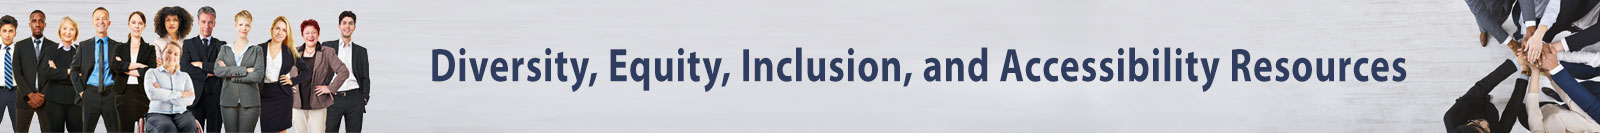 Diversity, Equity, Inclusion, and Accessibility Resources